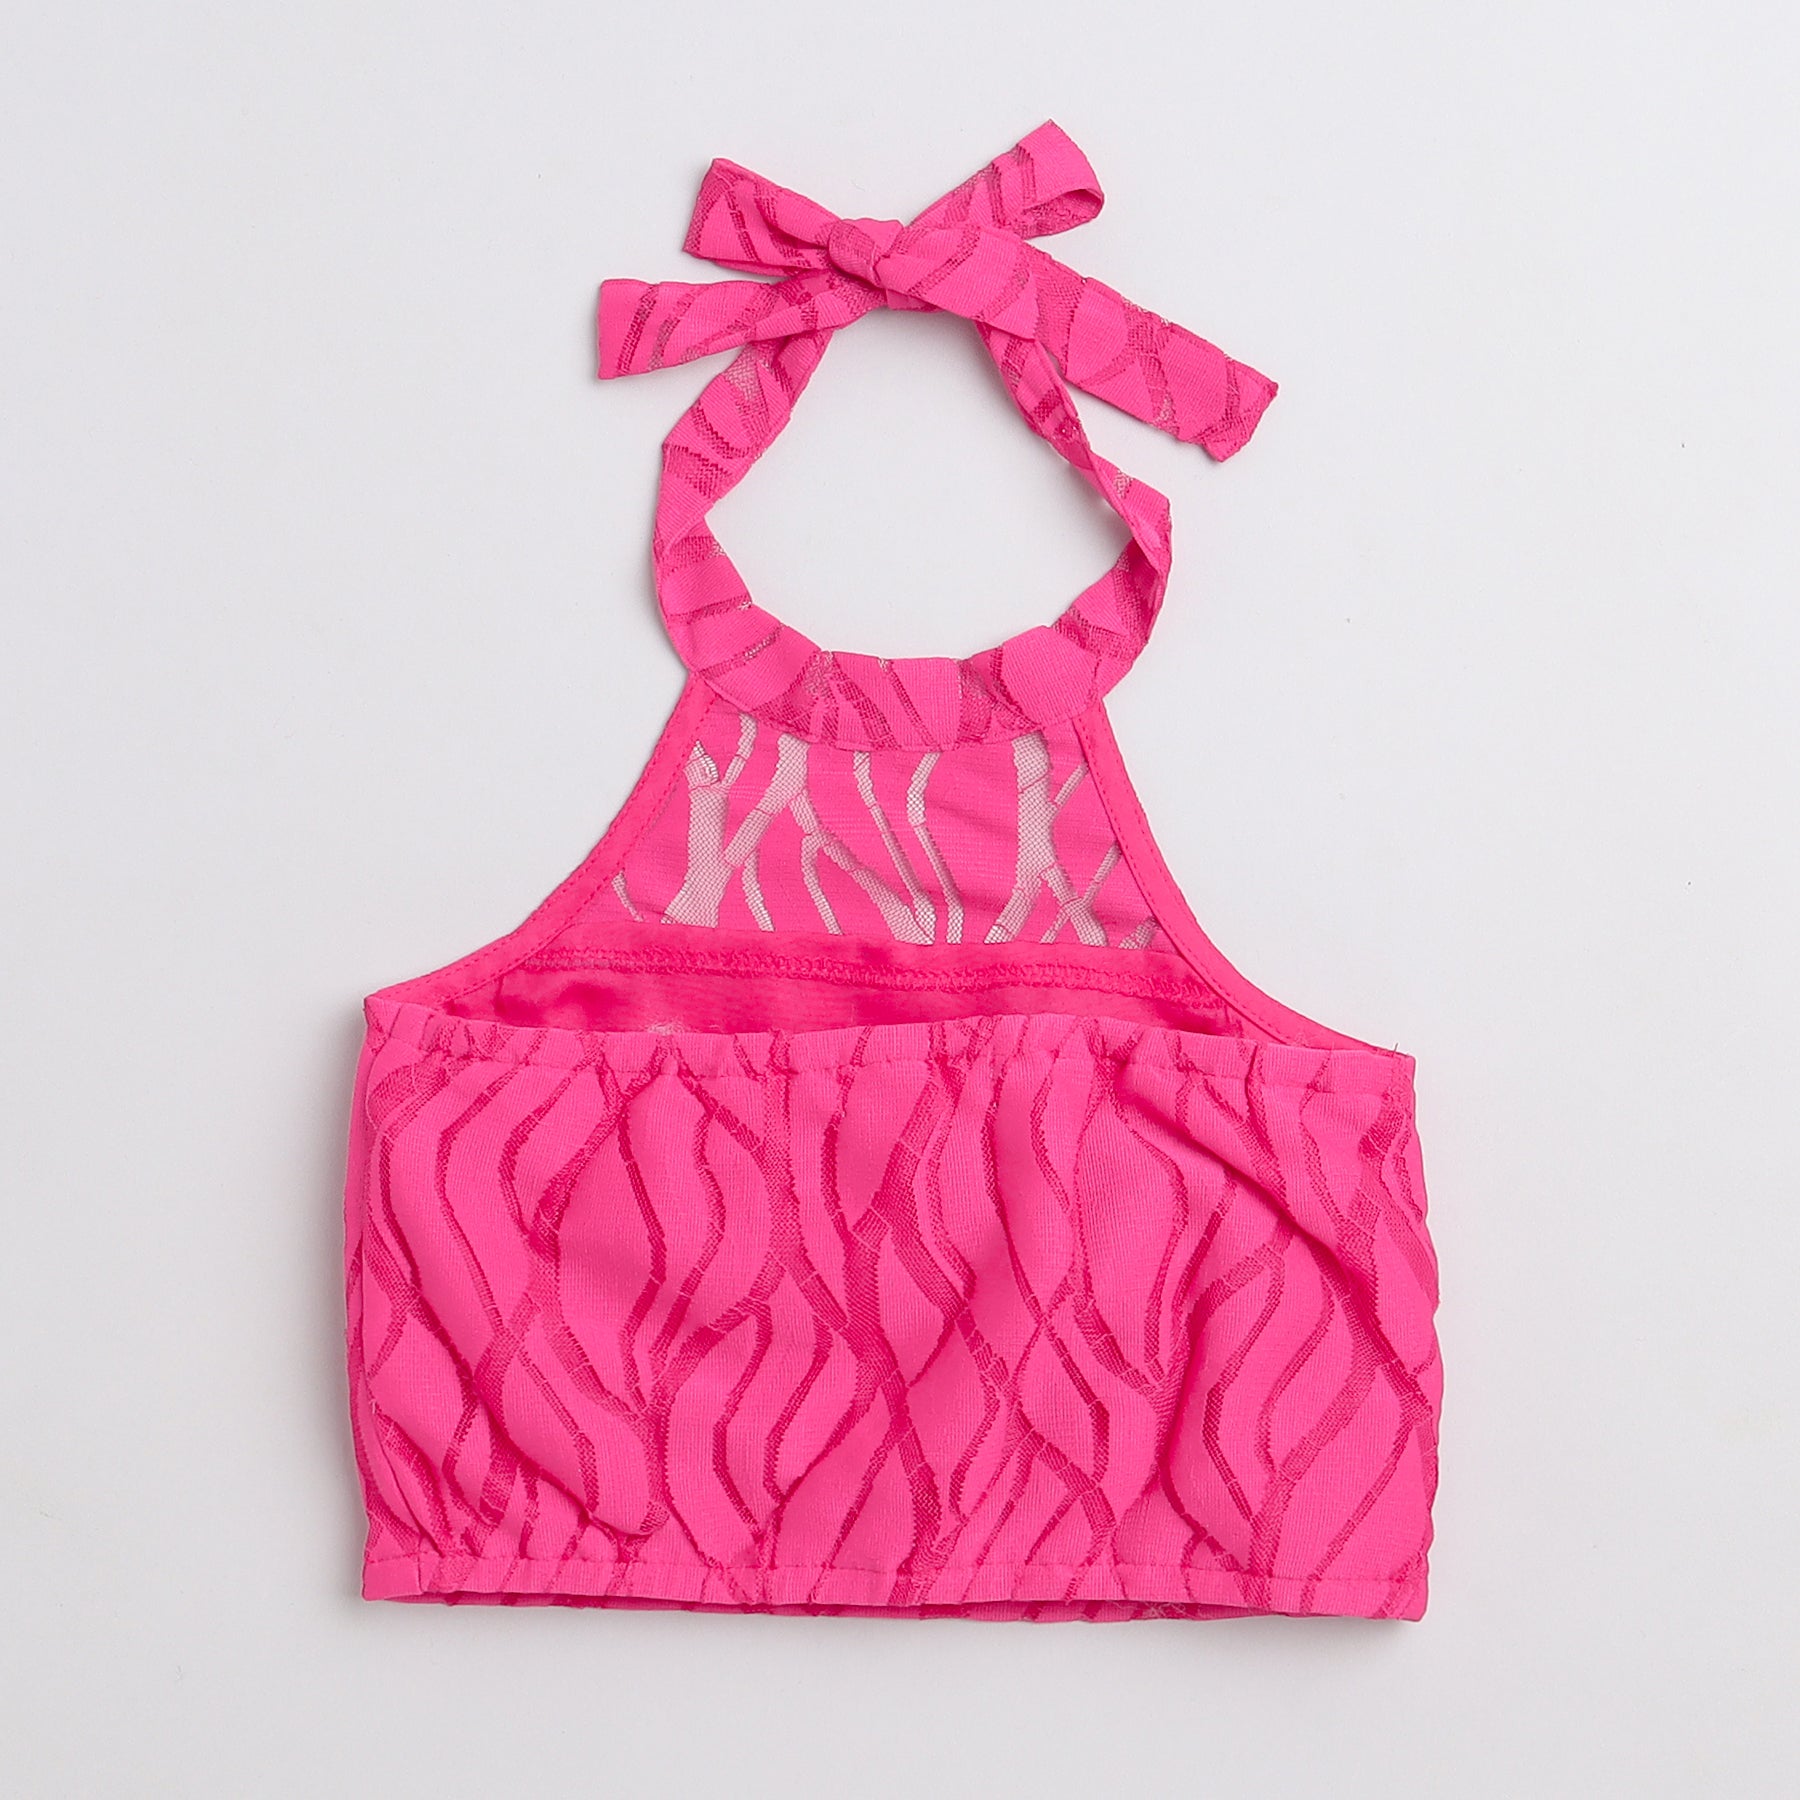 Taffykids abstract work halter neck crop top with flared pant set - Pink